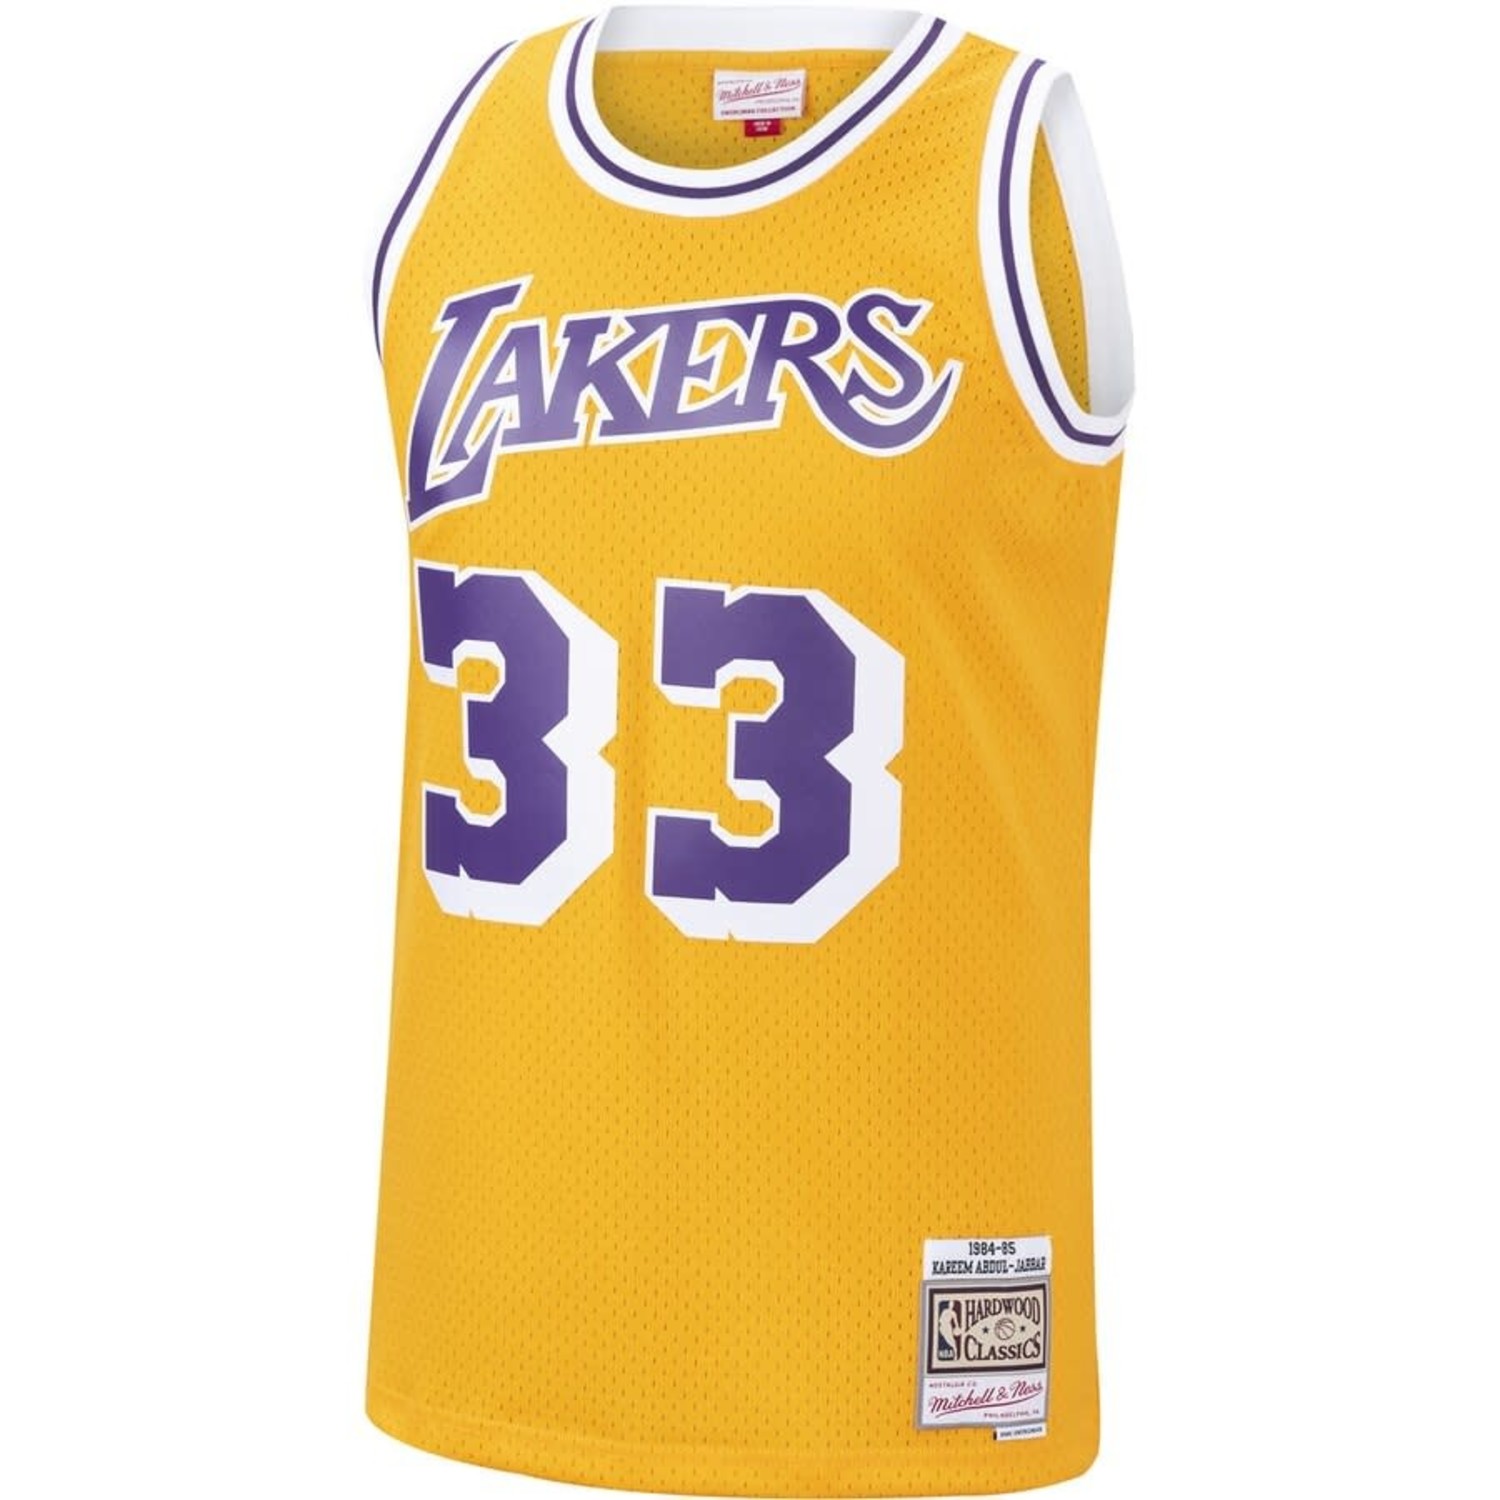 lakers 33 jersey